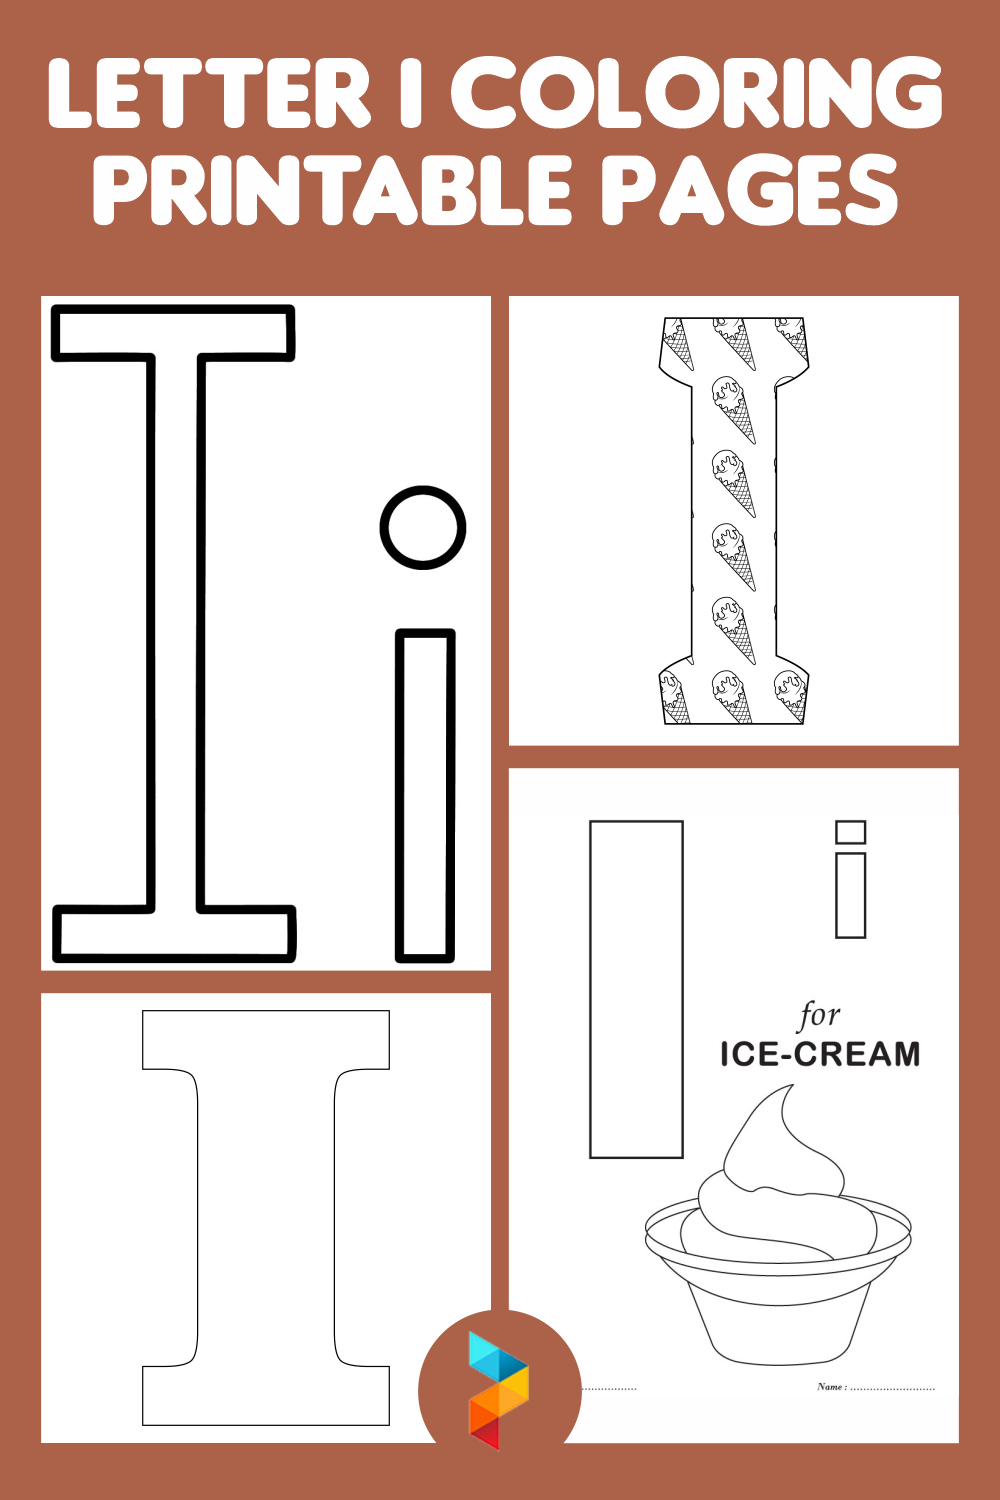 Letter I Coloring Printable Pages